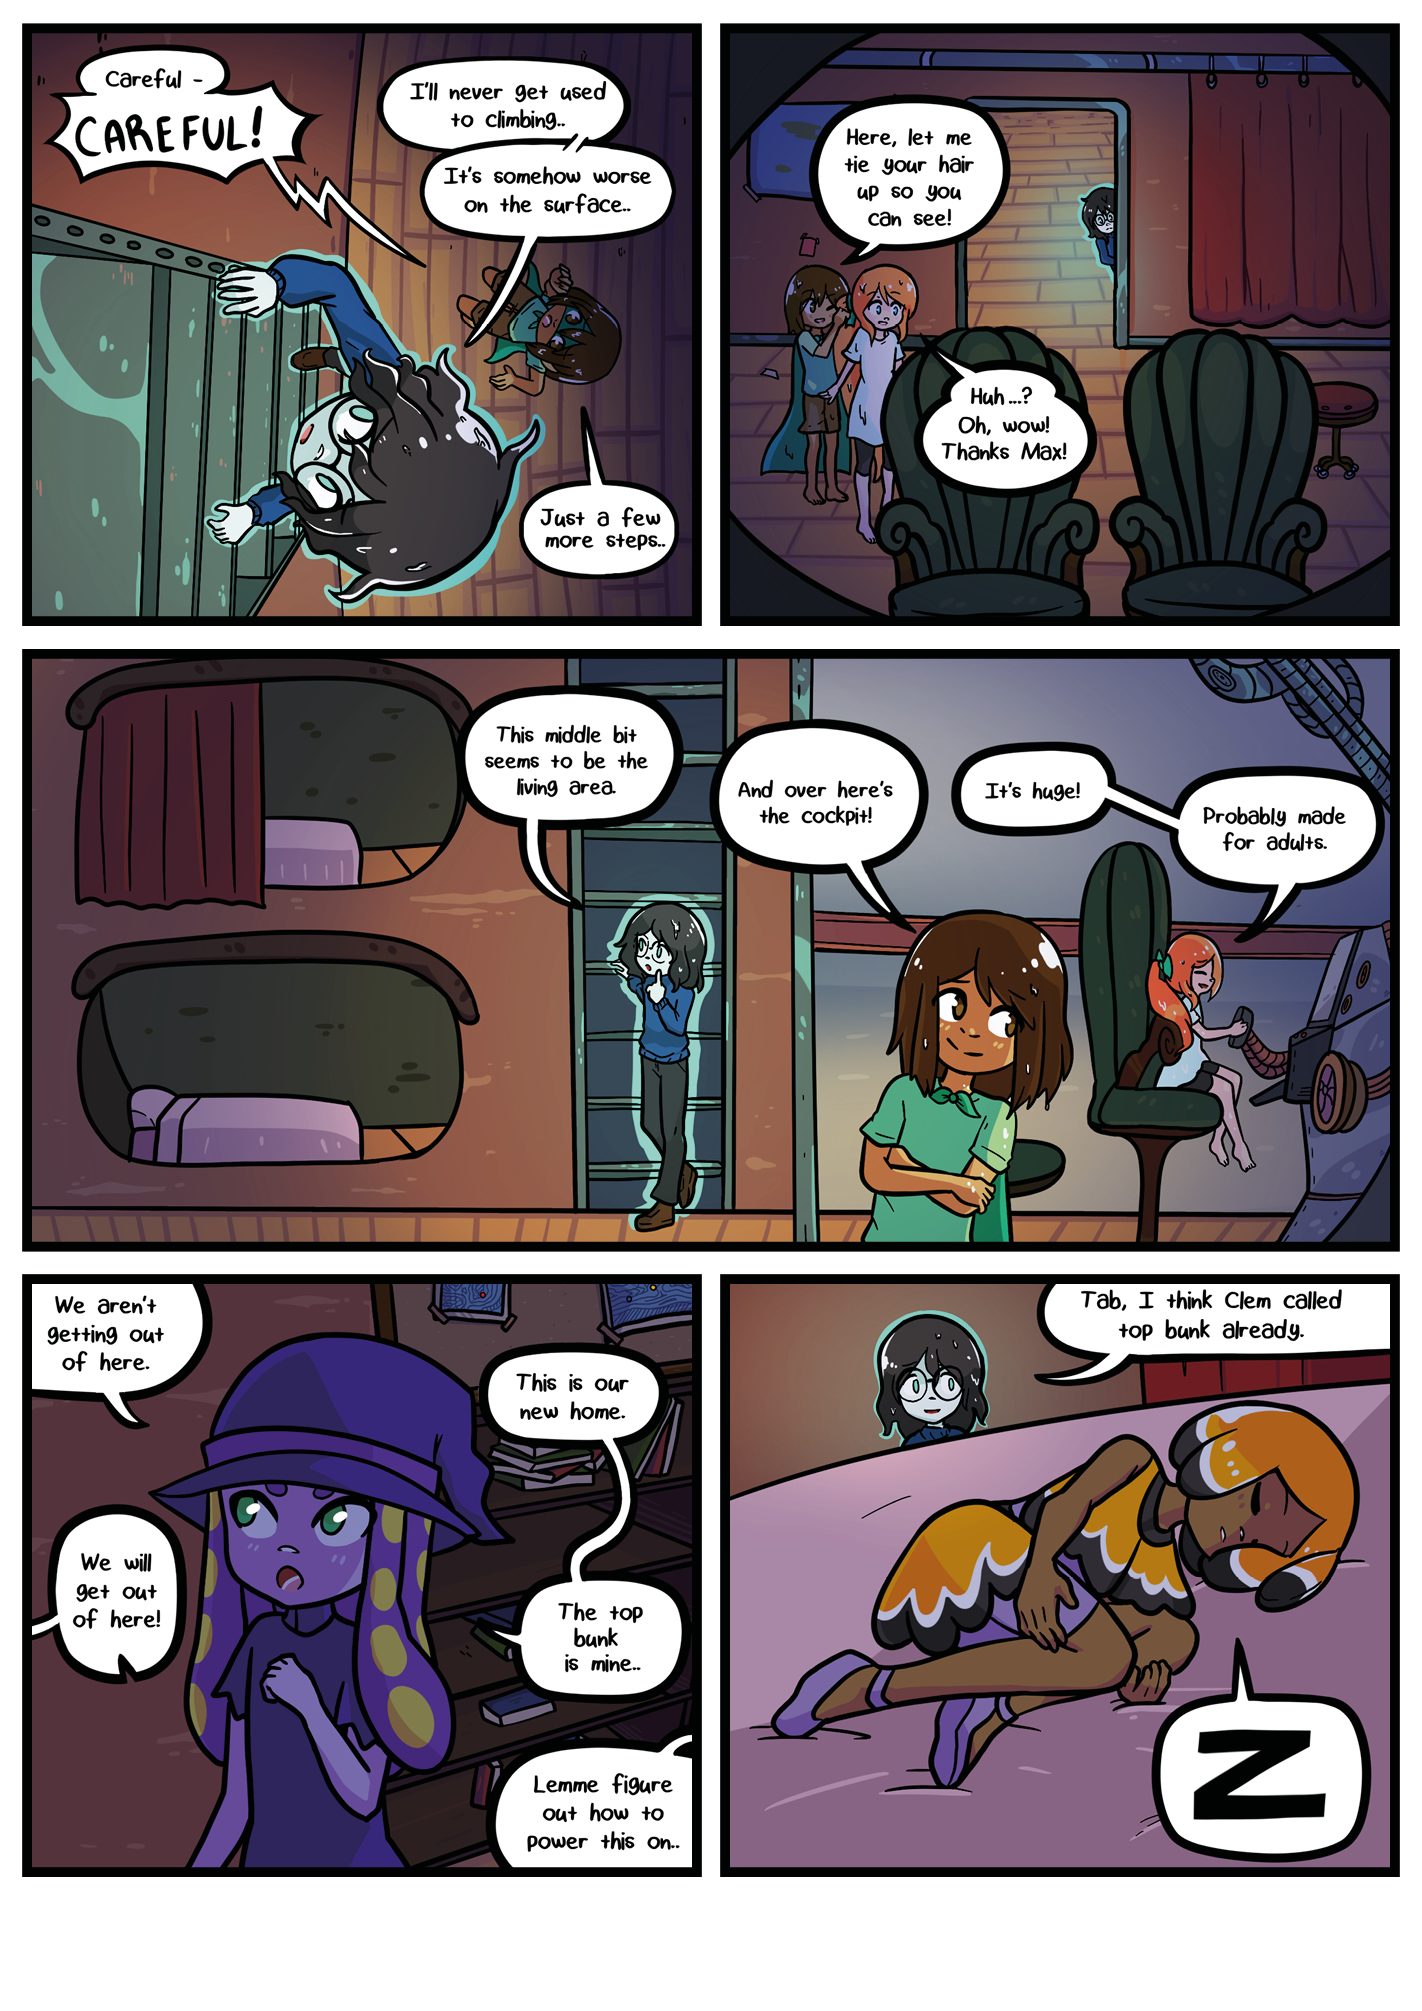 Seasick the underwater adventure comic, chapter 2 page 88 full